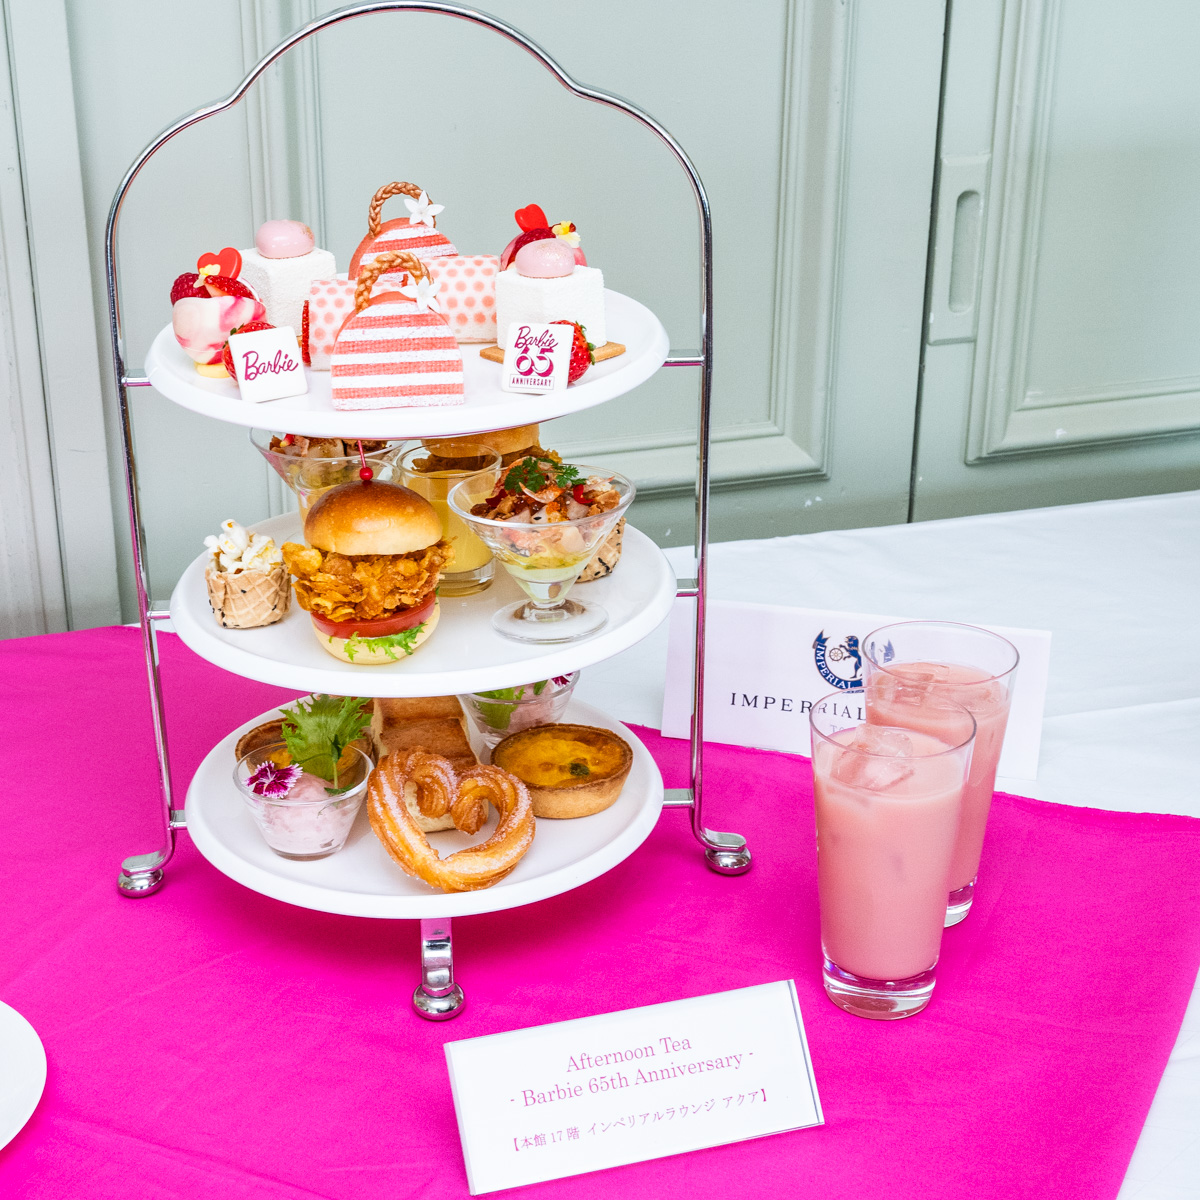 Afternoon Tea - Barbie 65th Anniversary -撮影